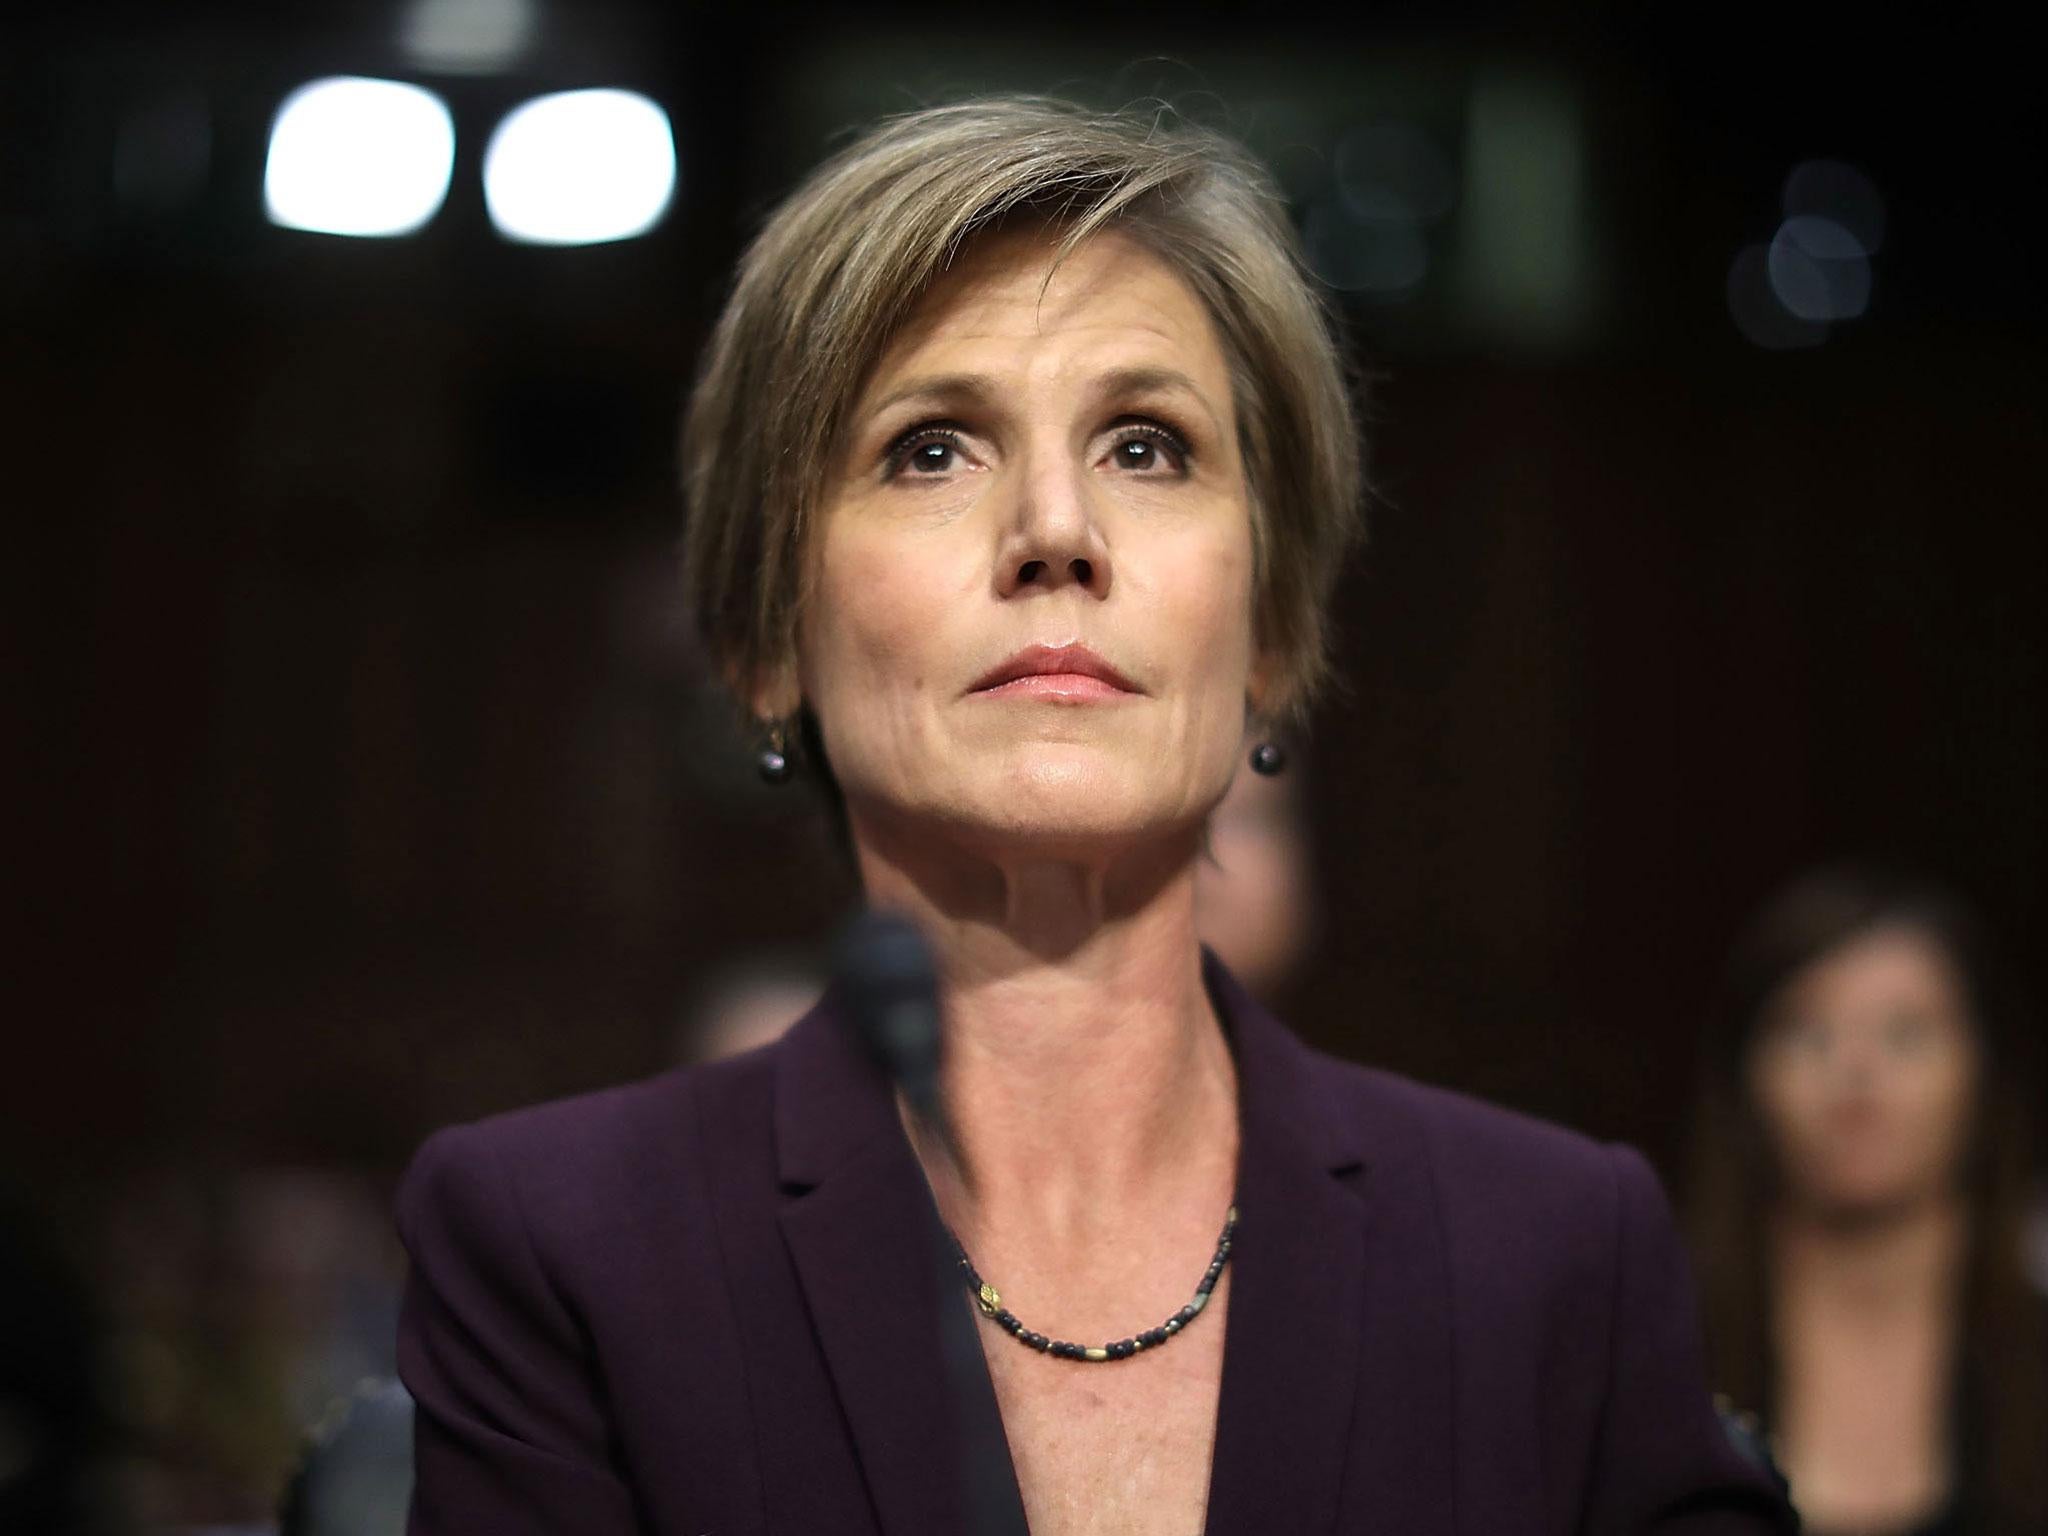 Donald Trump fired Sally Yates from the Department of Justice after she ordered federal attorneys not to defend his travel ban